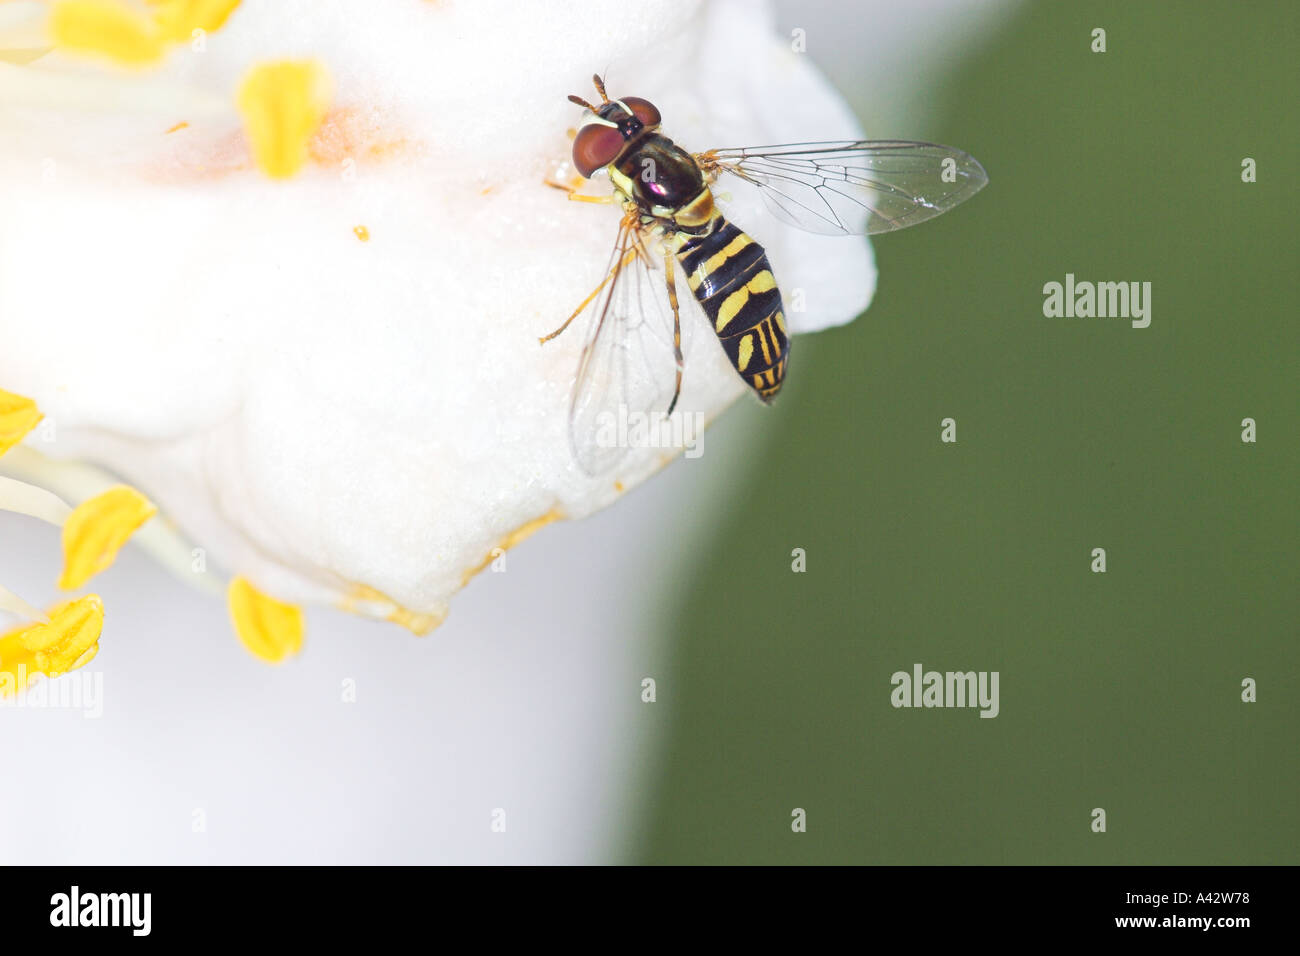 Hoverfly on White Flower Stock Photo